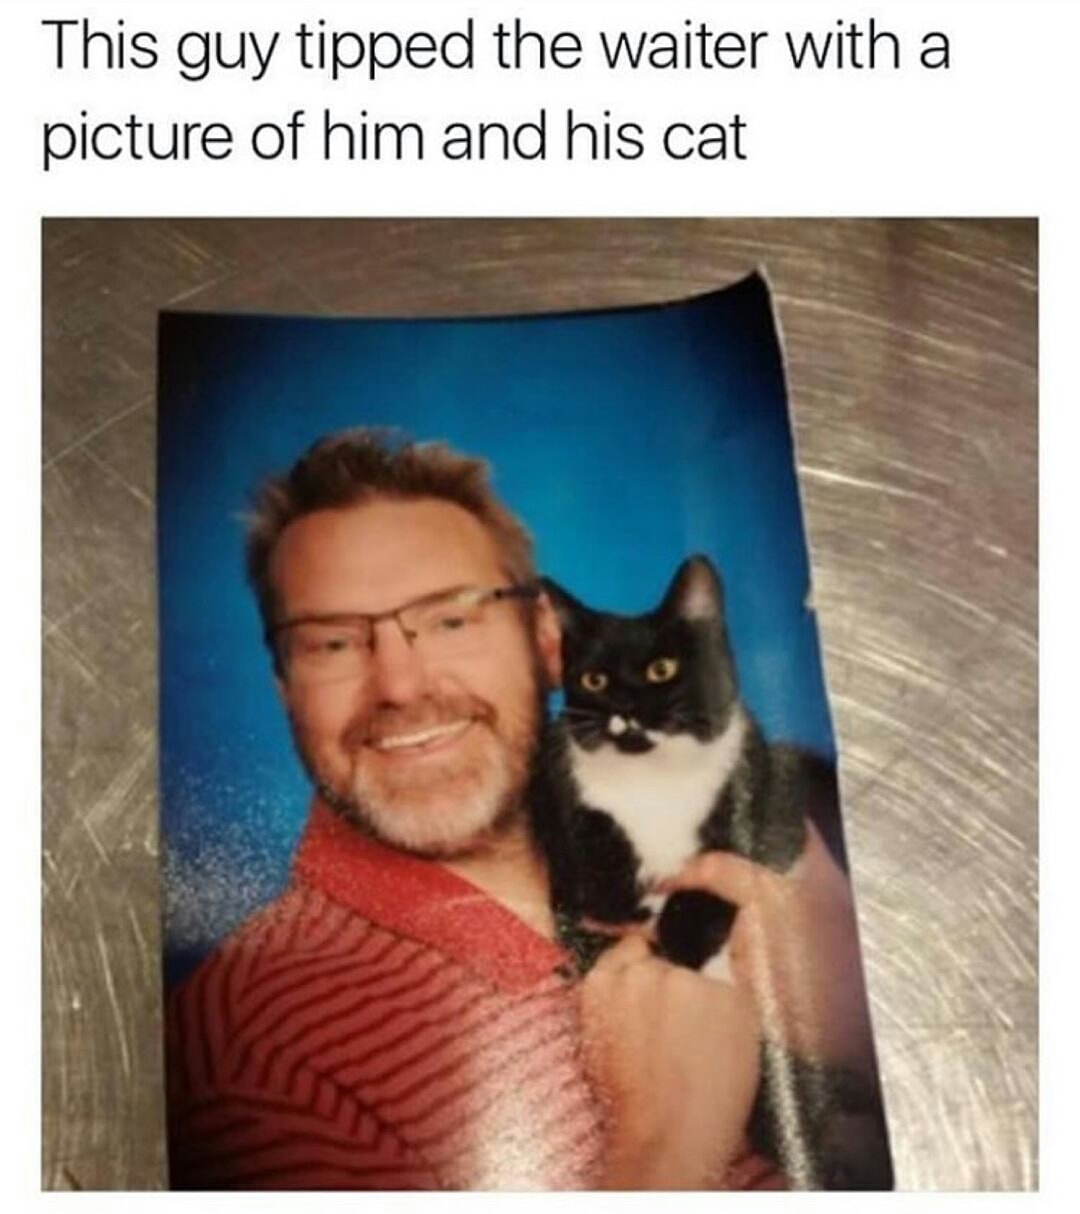 Meme of a man that left a pic of him and his cat as a tip for the waiter.